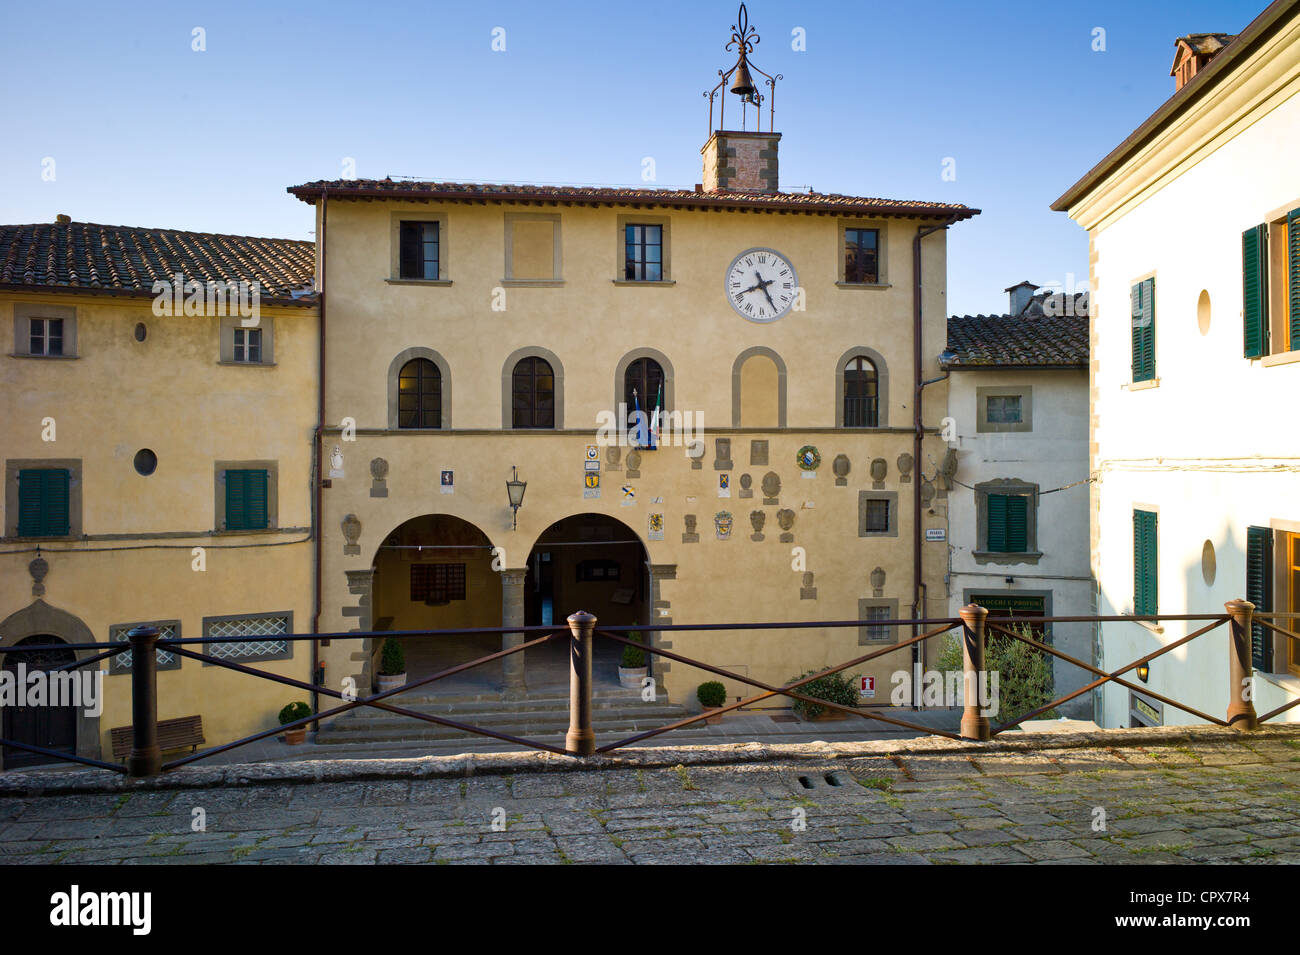 Town Hall, The Palace of the Podesta, in Piazza Francesco Ferrucci, Radda-in-Chianti, Tuscany, Italy Stock Photo